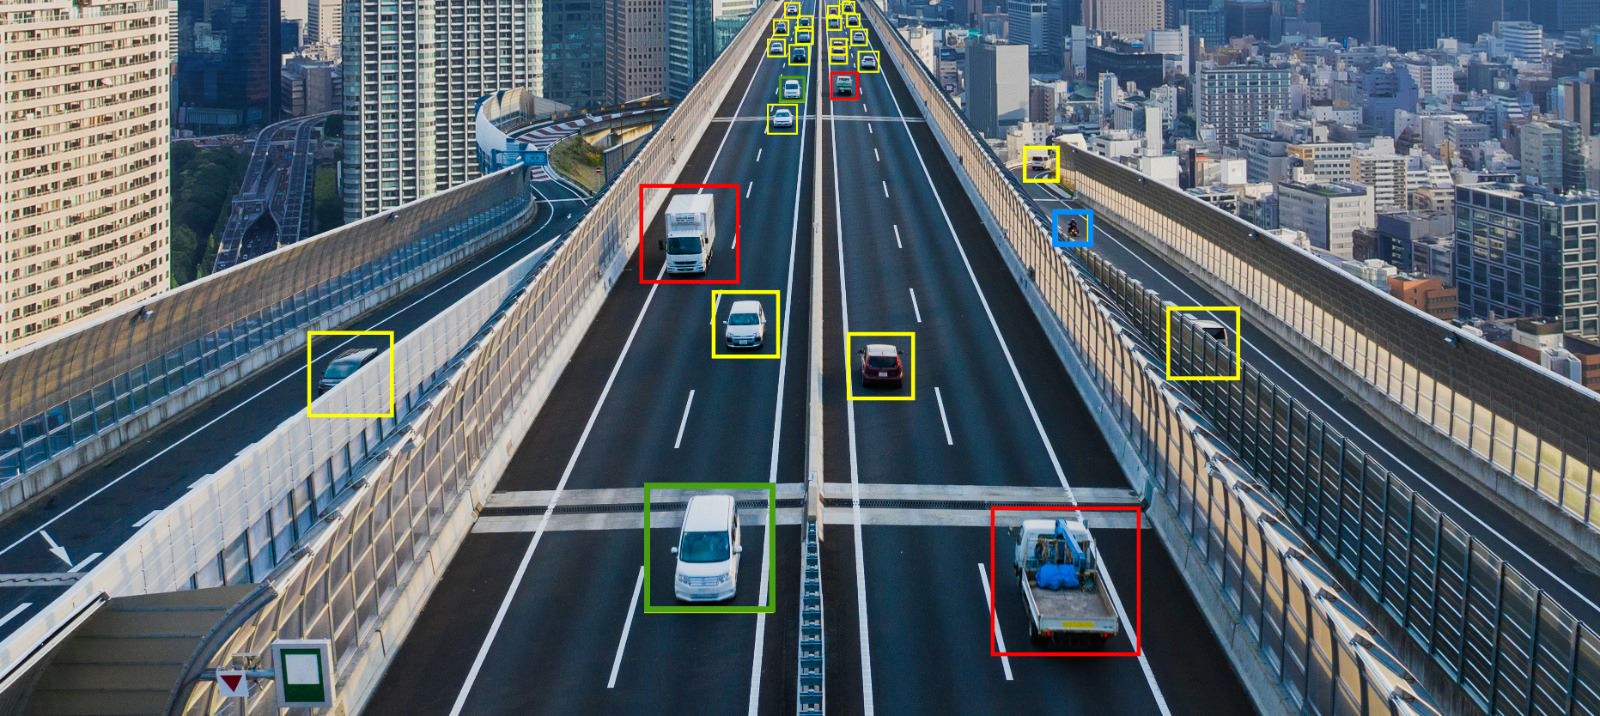 Autonomous vehicles on a highway in tokyo.